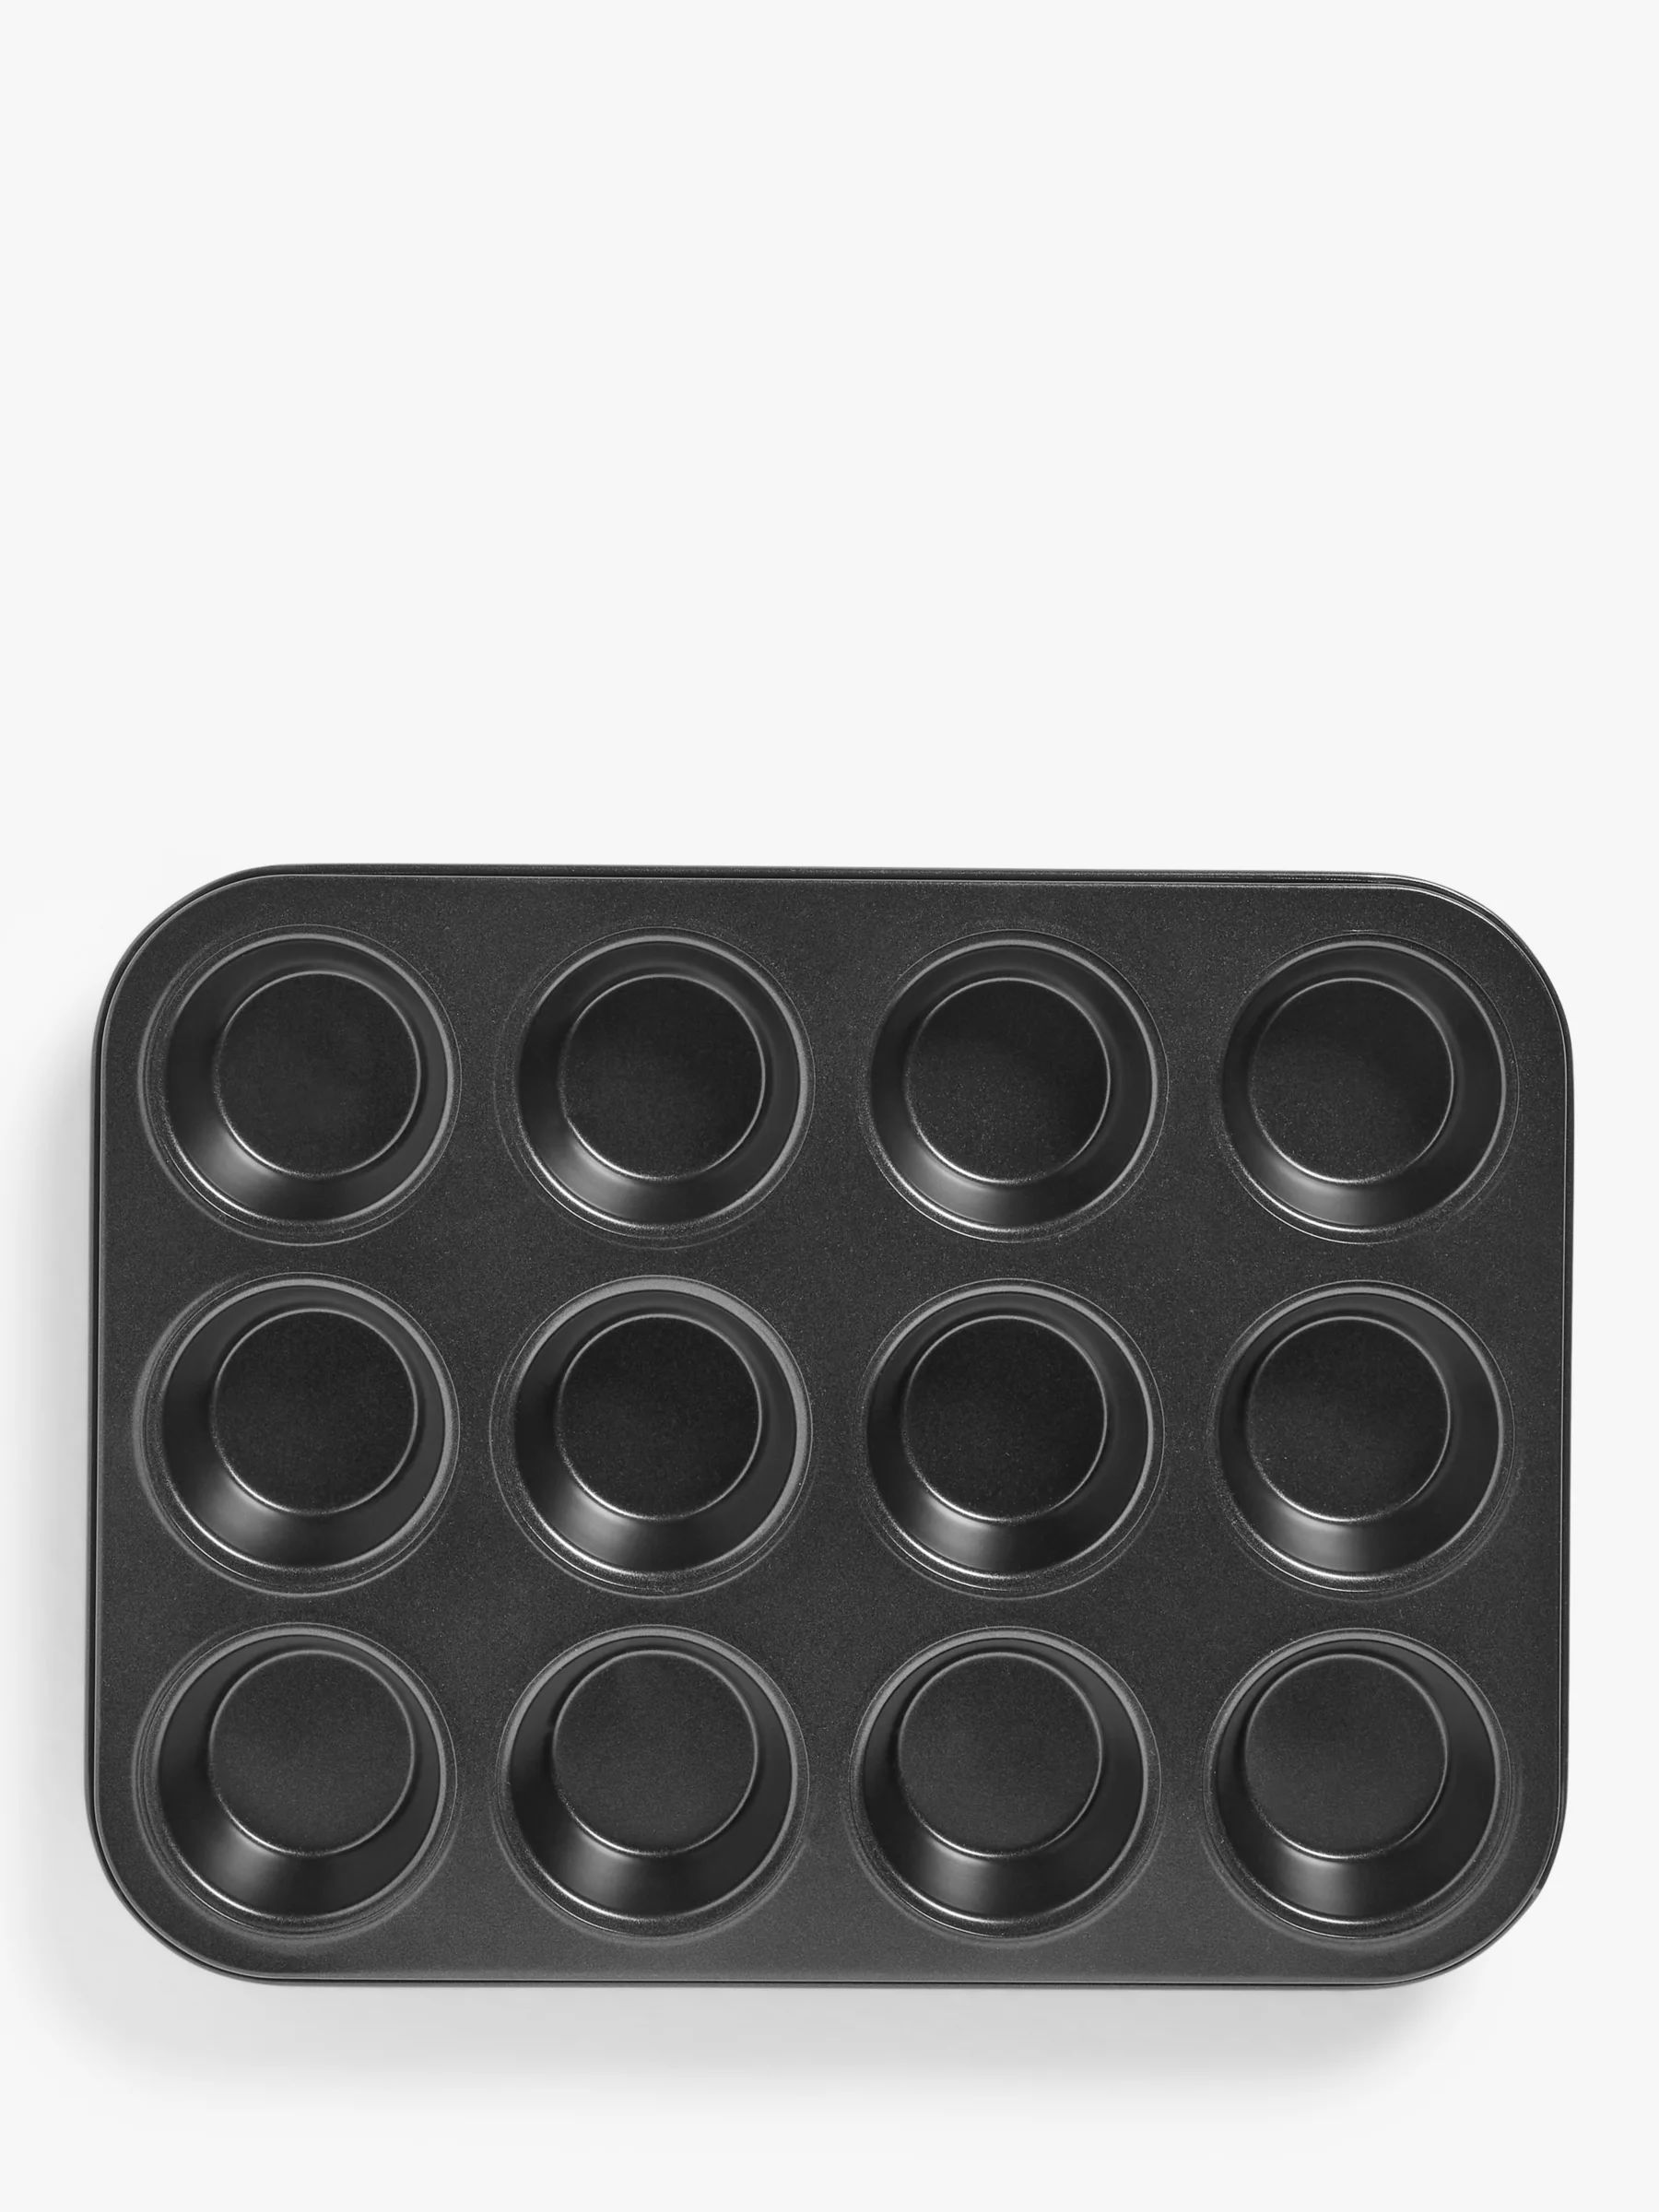 John Lewis ANYDAY Carbon Steel Non-Stick Muffin Tray, 12 Cup | John Lewis (UK)